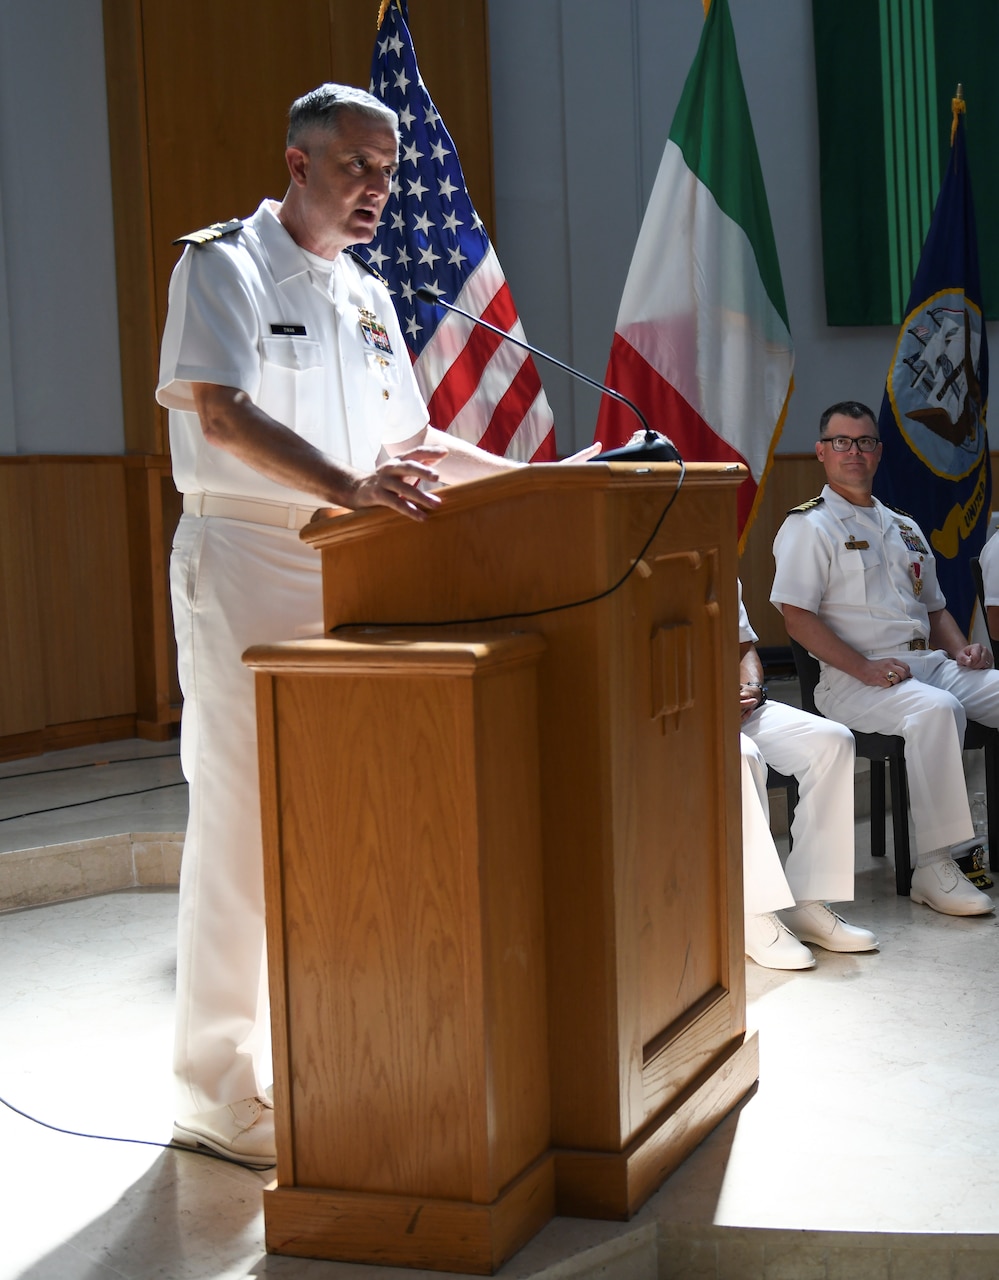 Cmdr. Mike Dwan, incoming commodore of commander, task force (CTF) 64, delivers remarks during a change of command ceremony onboard Naval Support Activity Naples, Italy, Aug. 3, 2023. CTF 64's mission is to execute operational and tactical integrated air and missile defense (IAMD), including mission planning, execution, and operational and tactical control of assigned units for commander, U.S. Naval Forces Europe-Africa and commander, U.S. Sixth Fleet. CTF 64 also provides direct support for Aegis ballistic missile defense planning to commander, U.S. Air Forces Europe and commander, Allied Air Command. (U.S. Navy photo by Mass Communication Specialist Seaman Joseph Macklin)